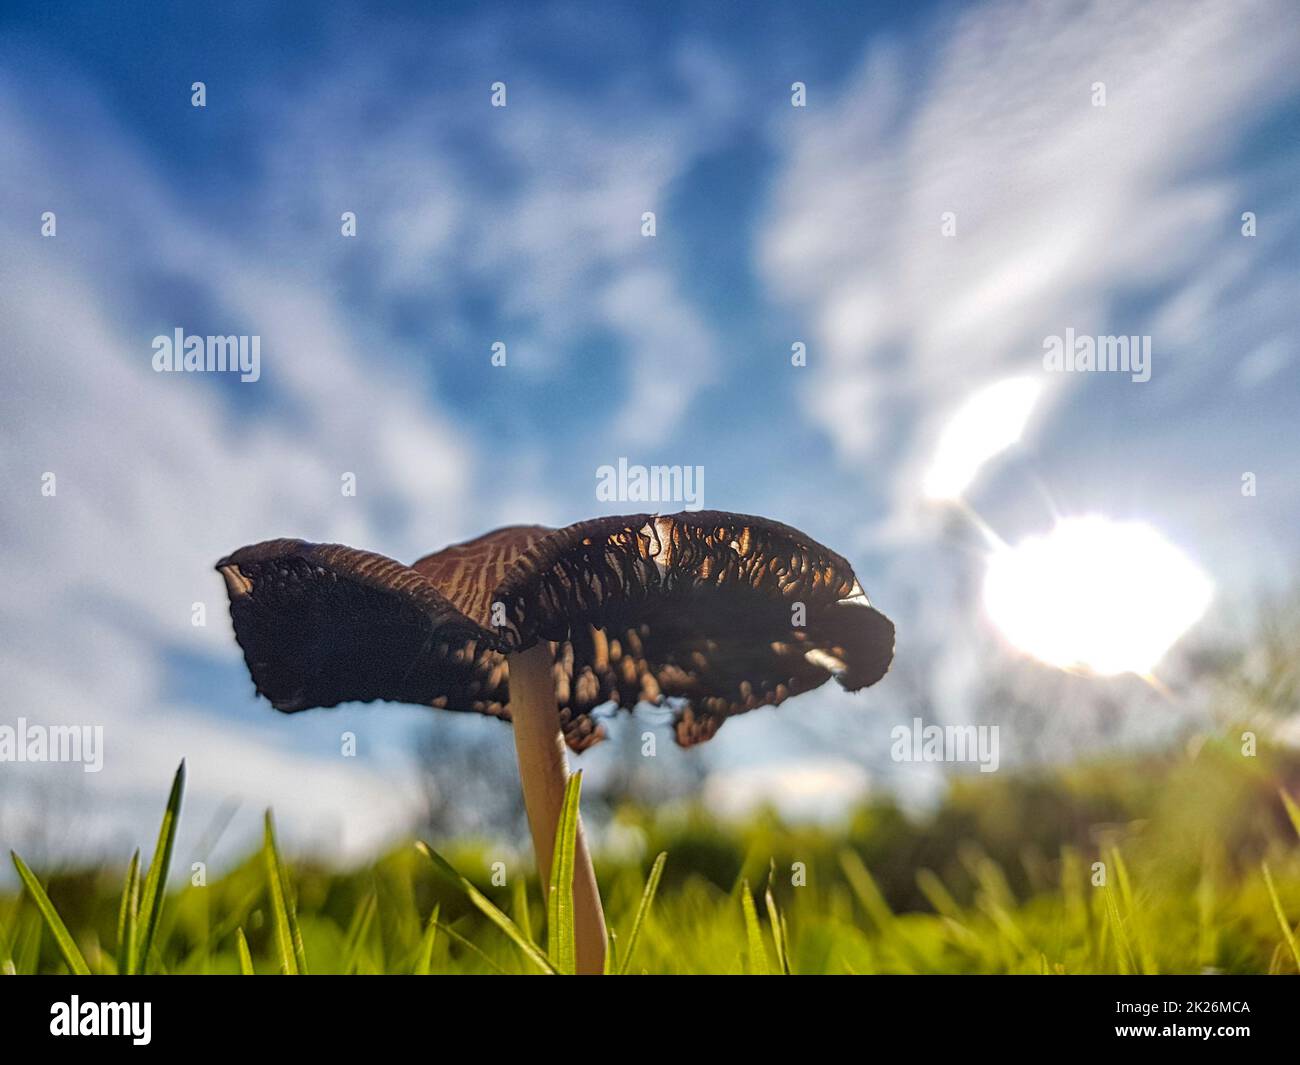 A small mushroom during a nice sunny day Stock Photo